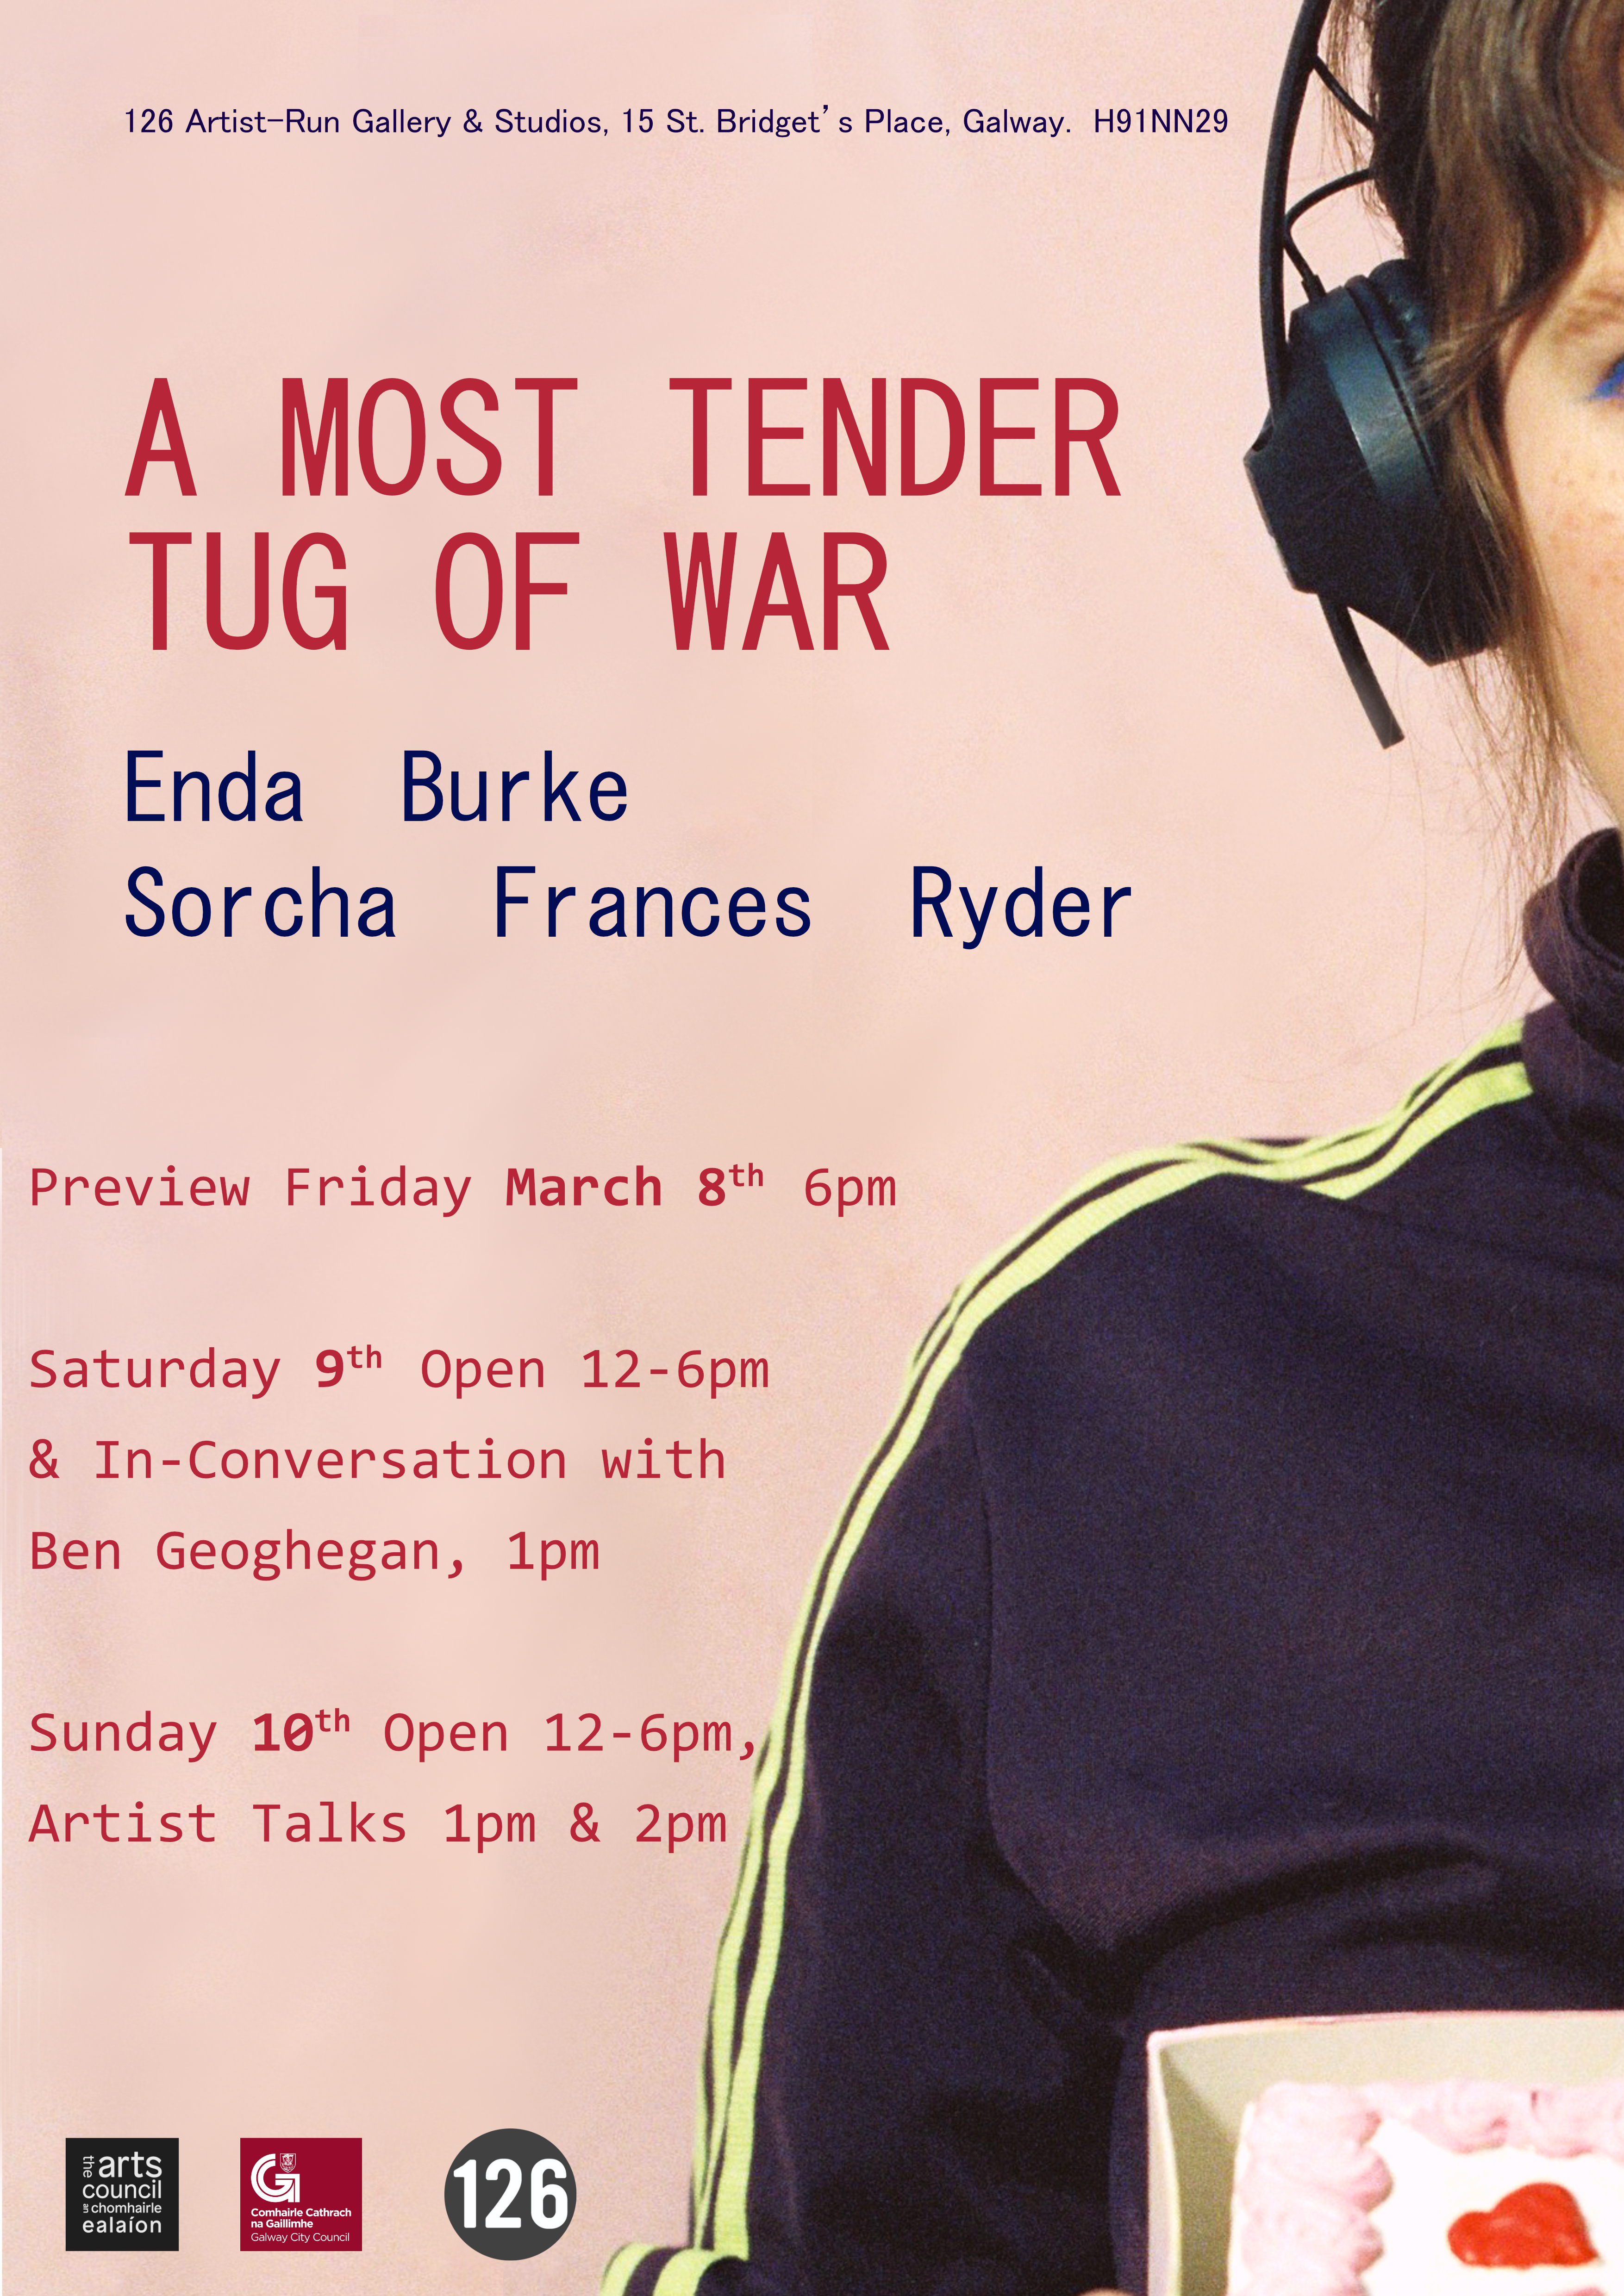 Pop-Up Exhibition at 126 Gallery (H91NN29) called A MOST TENDER TUG OF WAR, featuring work by artists Enda Burke and Sorcha Frances Ryder, from March 8th-10th 2024. The preview is on March 8th at 6pm; the gallery is open Saturday 9th from 12-6pm with an in-conversation event with Ben Geoghegan at 1pm; the gallery is open on Sunday 10th from 12-6pm with artist talks at 1 & 2pm. 126 Gallery is supported by the Arts Council of Ireland and Galway City Council Arts Office.